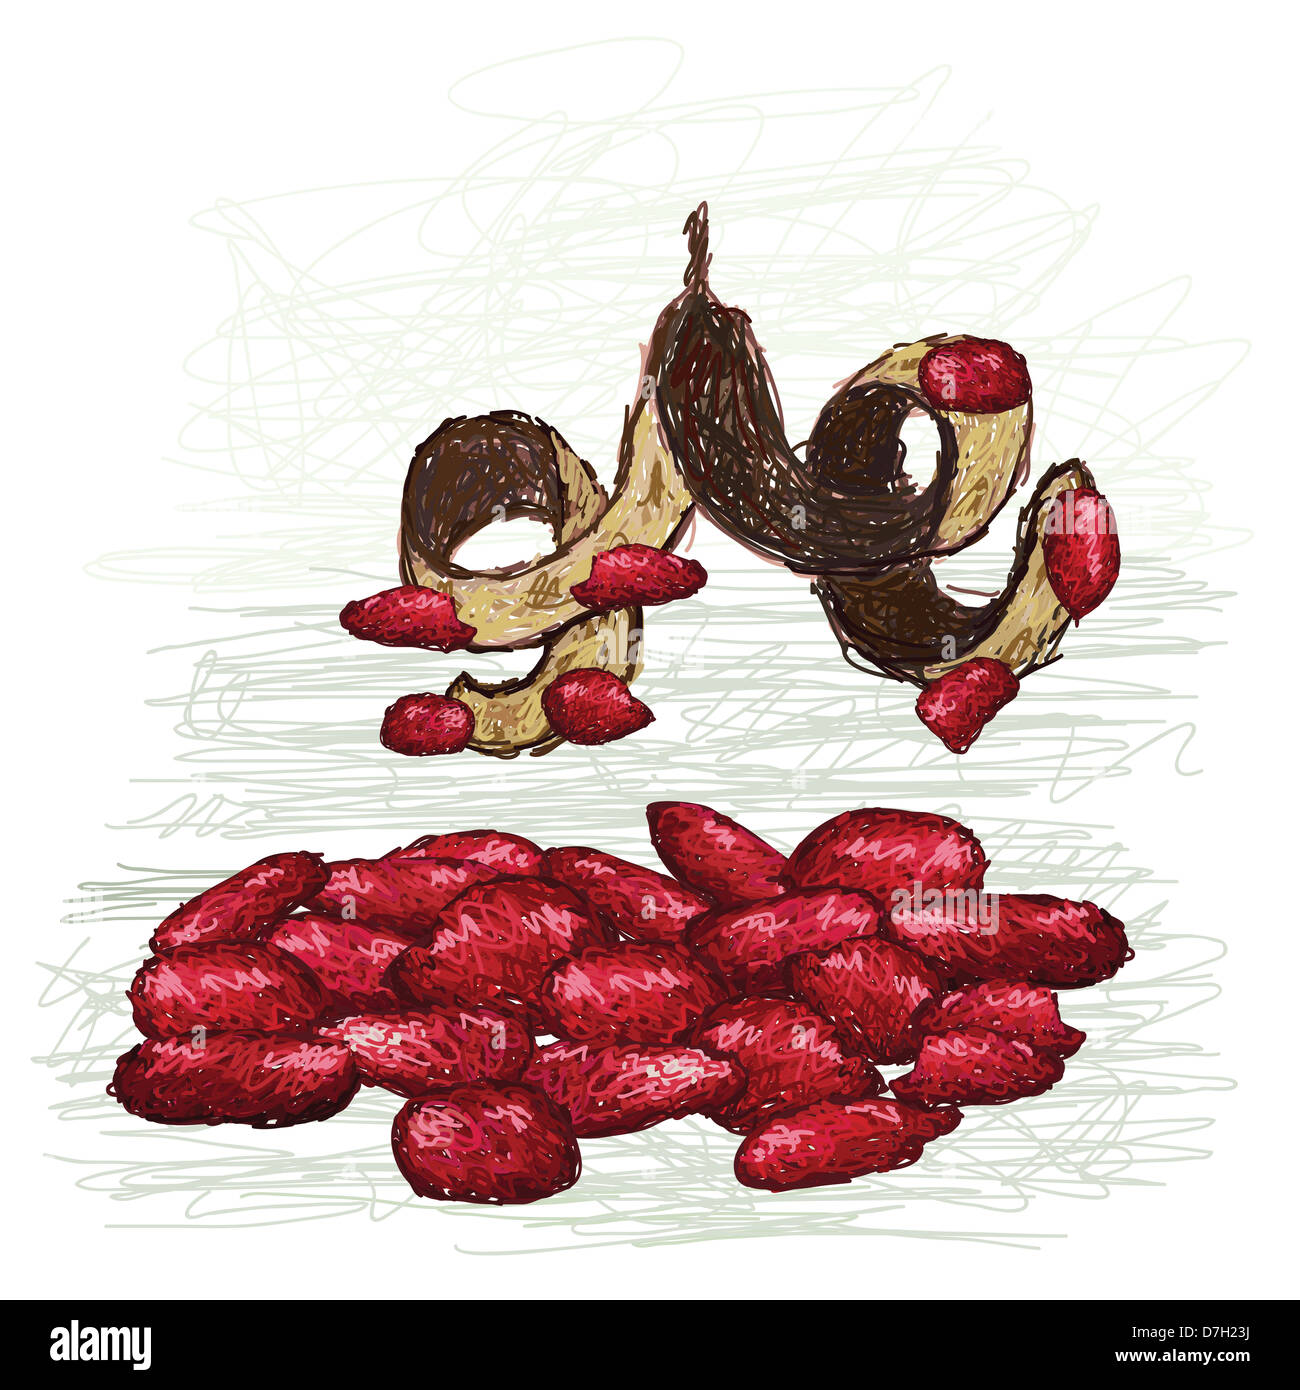 illustration of pile of red beads with pod. scientific name - Adenanthera pavonina. Stock Photo